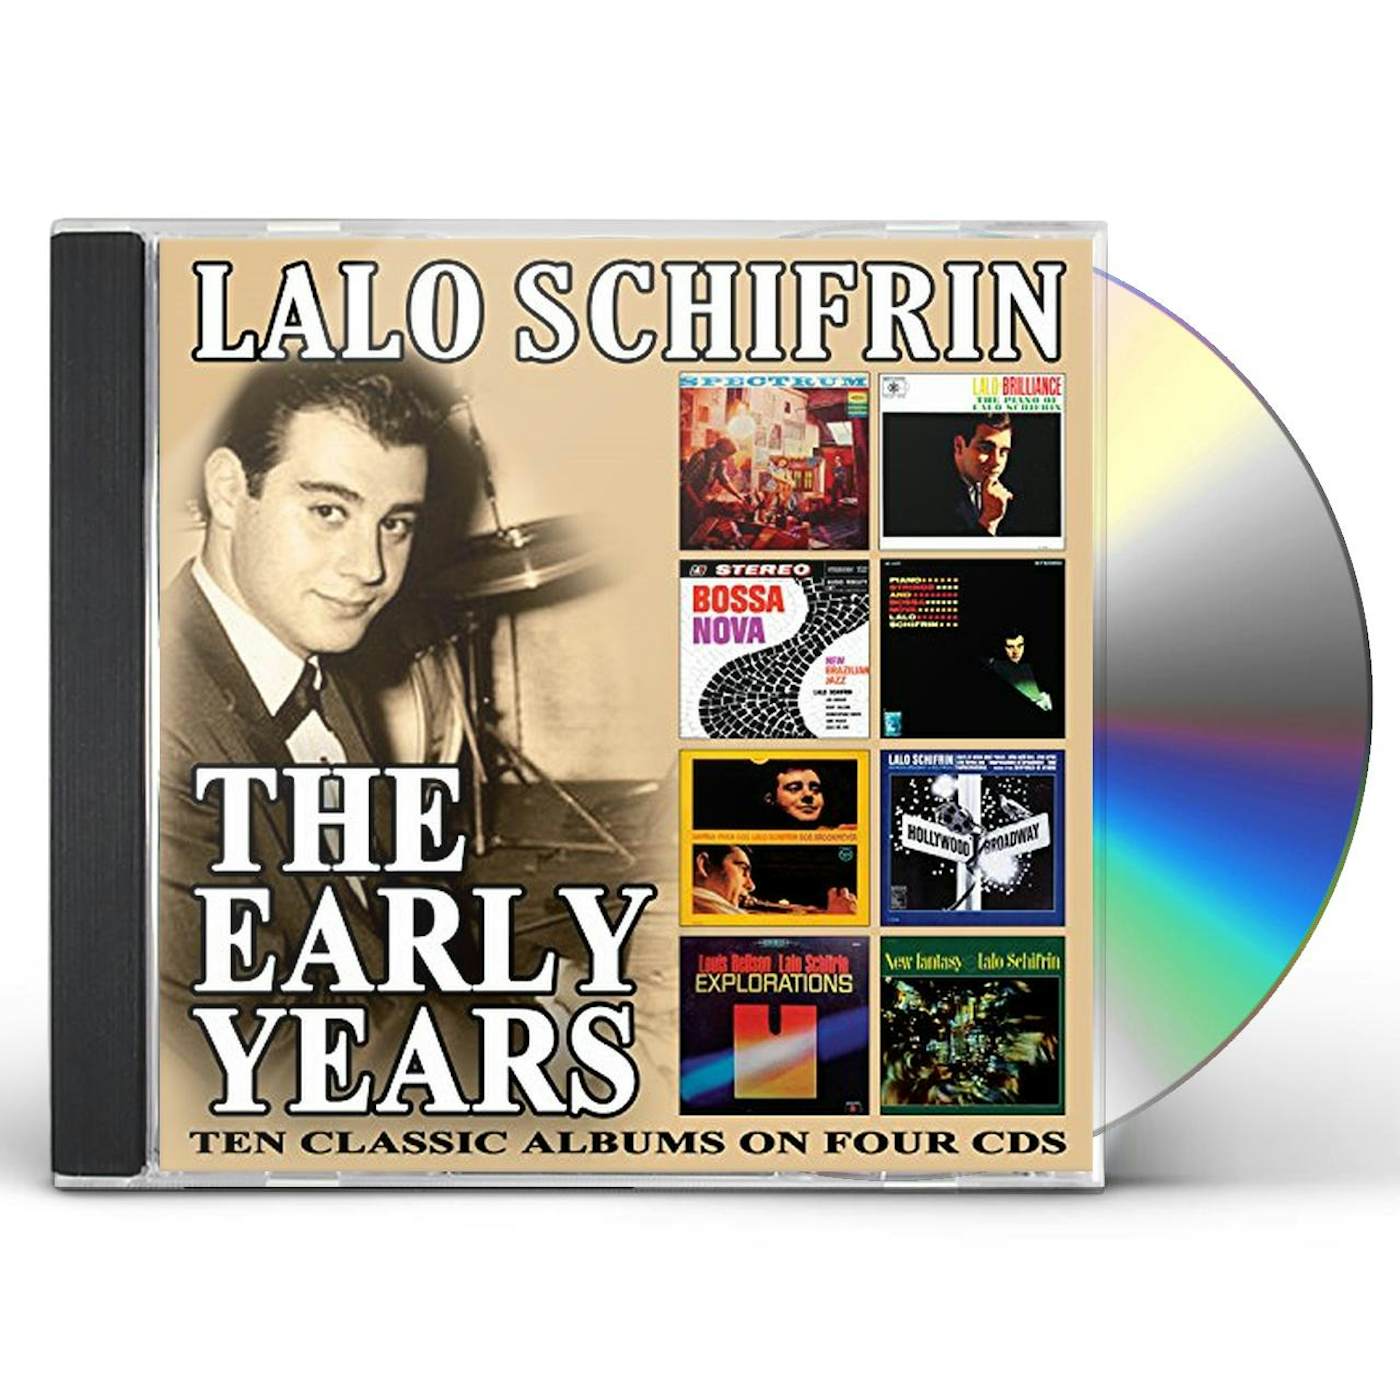 Lalo Schifrin EARLY YEARS CD